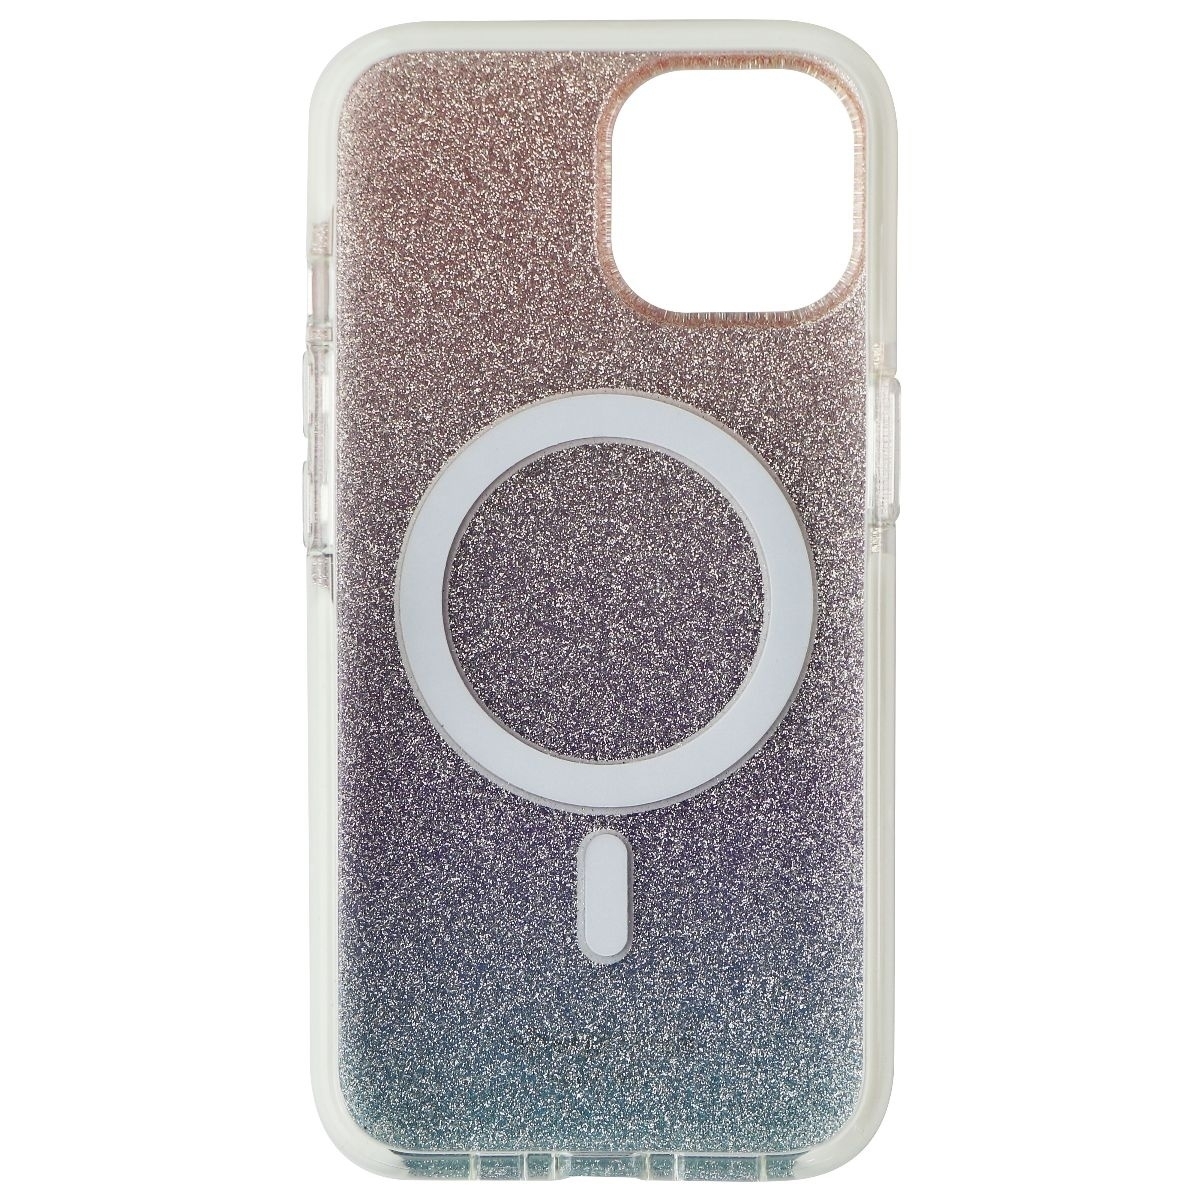 Kate Spade Defensive Hardshell Case For MagSafe For IPhone 14/13 - Ombre Glitter